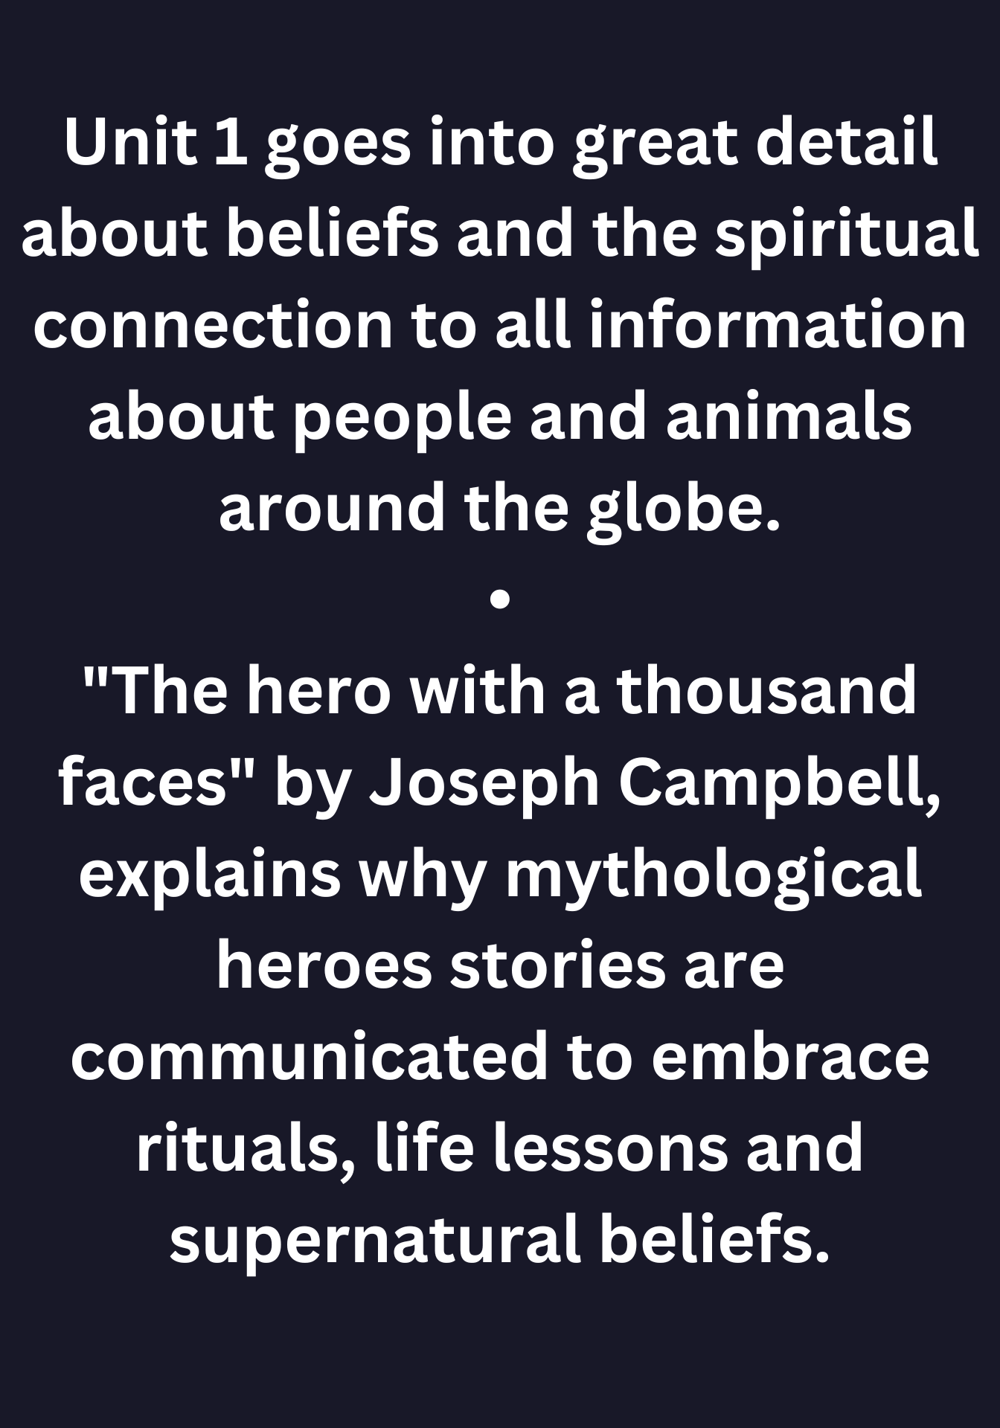 Anthropology might not seem like an obvious fit for witches and spiritual seekers, but it's actually incredibly valuable.